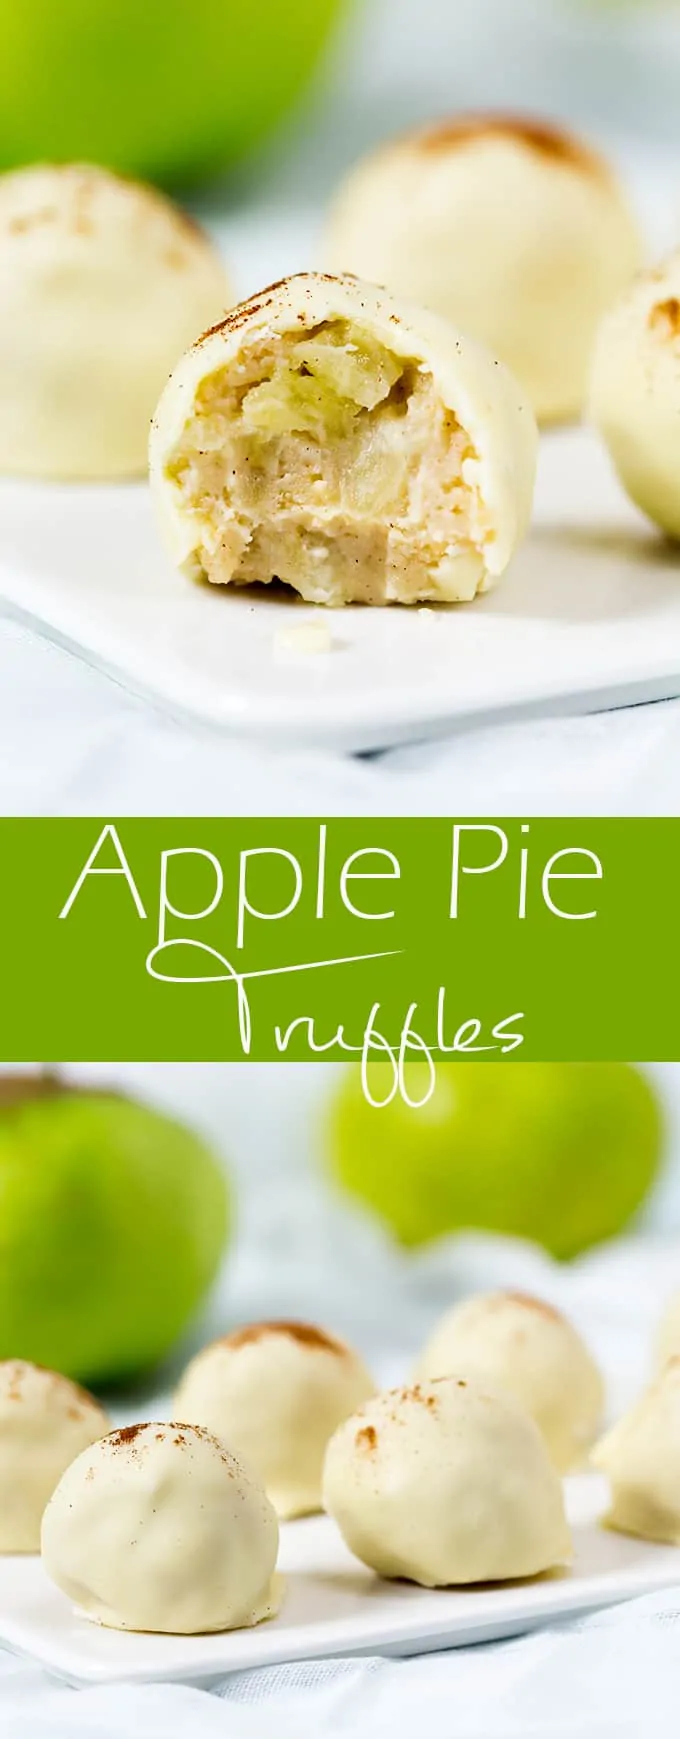 These apple pie truffles really do taste like apple pie! So delicious, and no baking required!